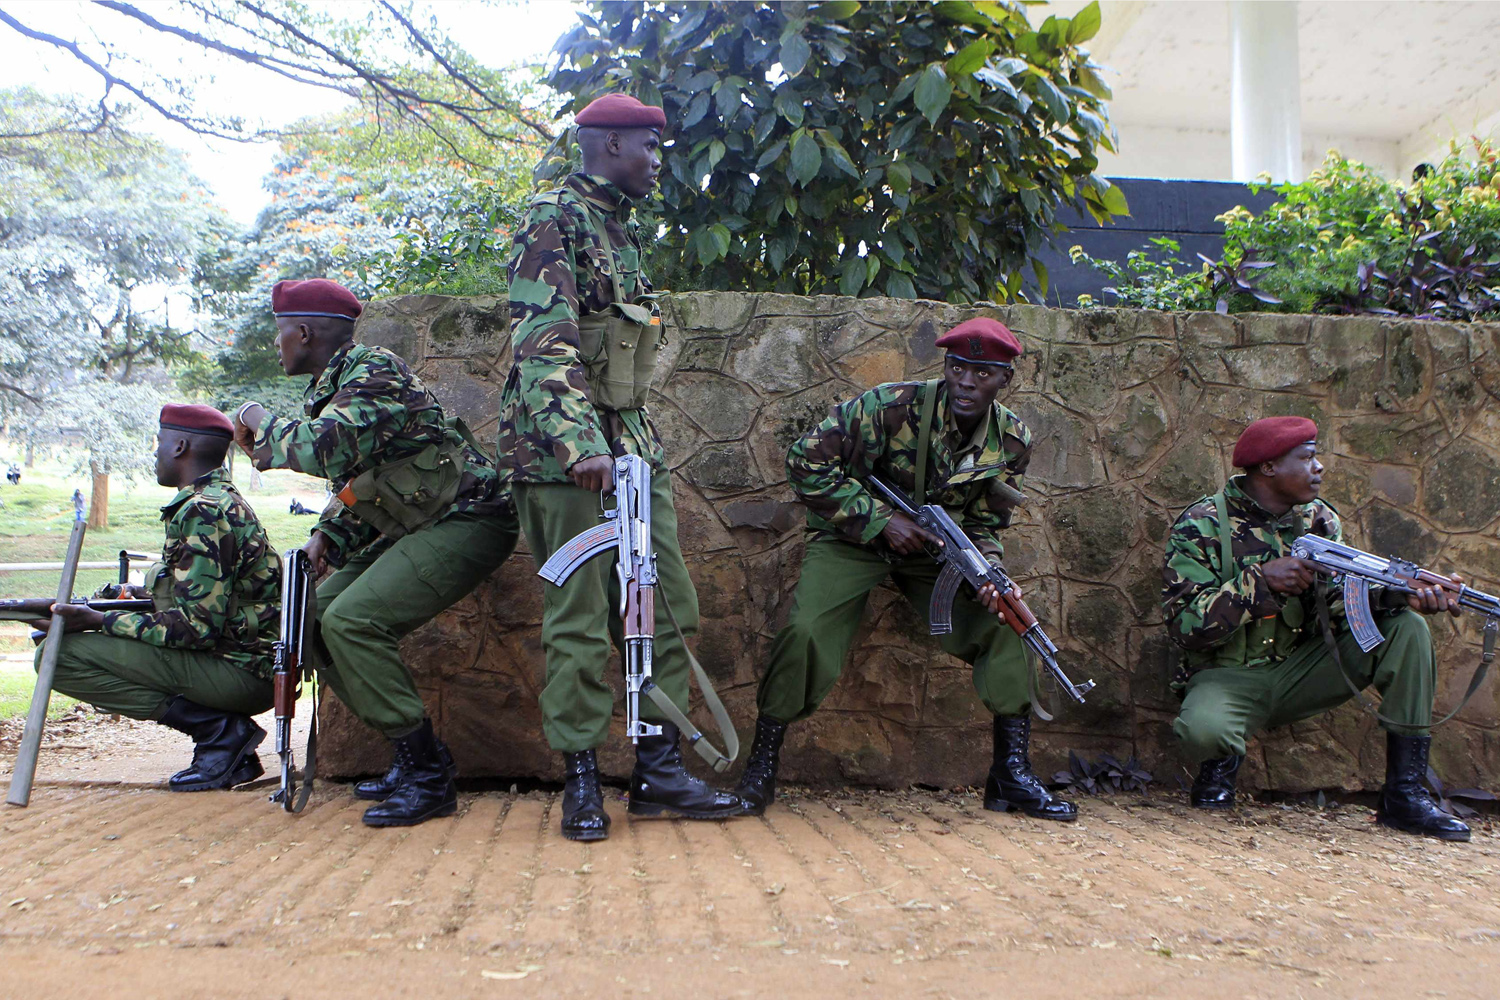 Policemen from the GSU take cover from stone throwing youths during the "Saba Saba Day" rally at the Uhuru park grounds in the capital Nairobi